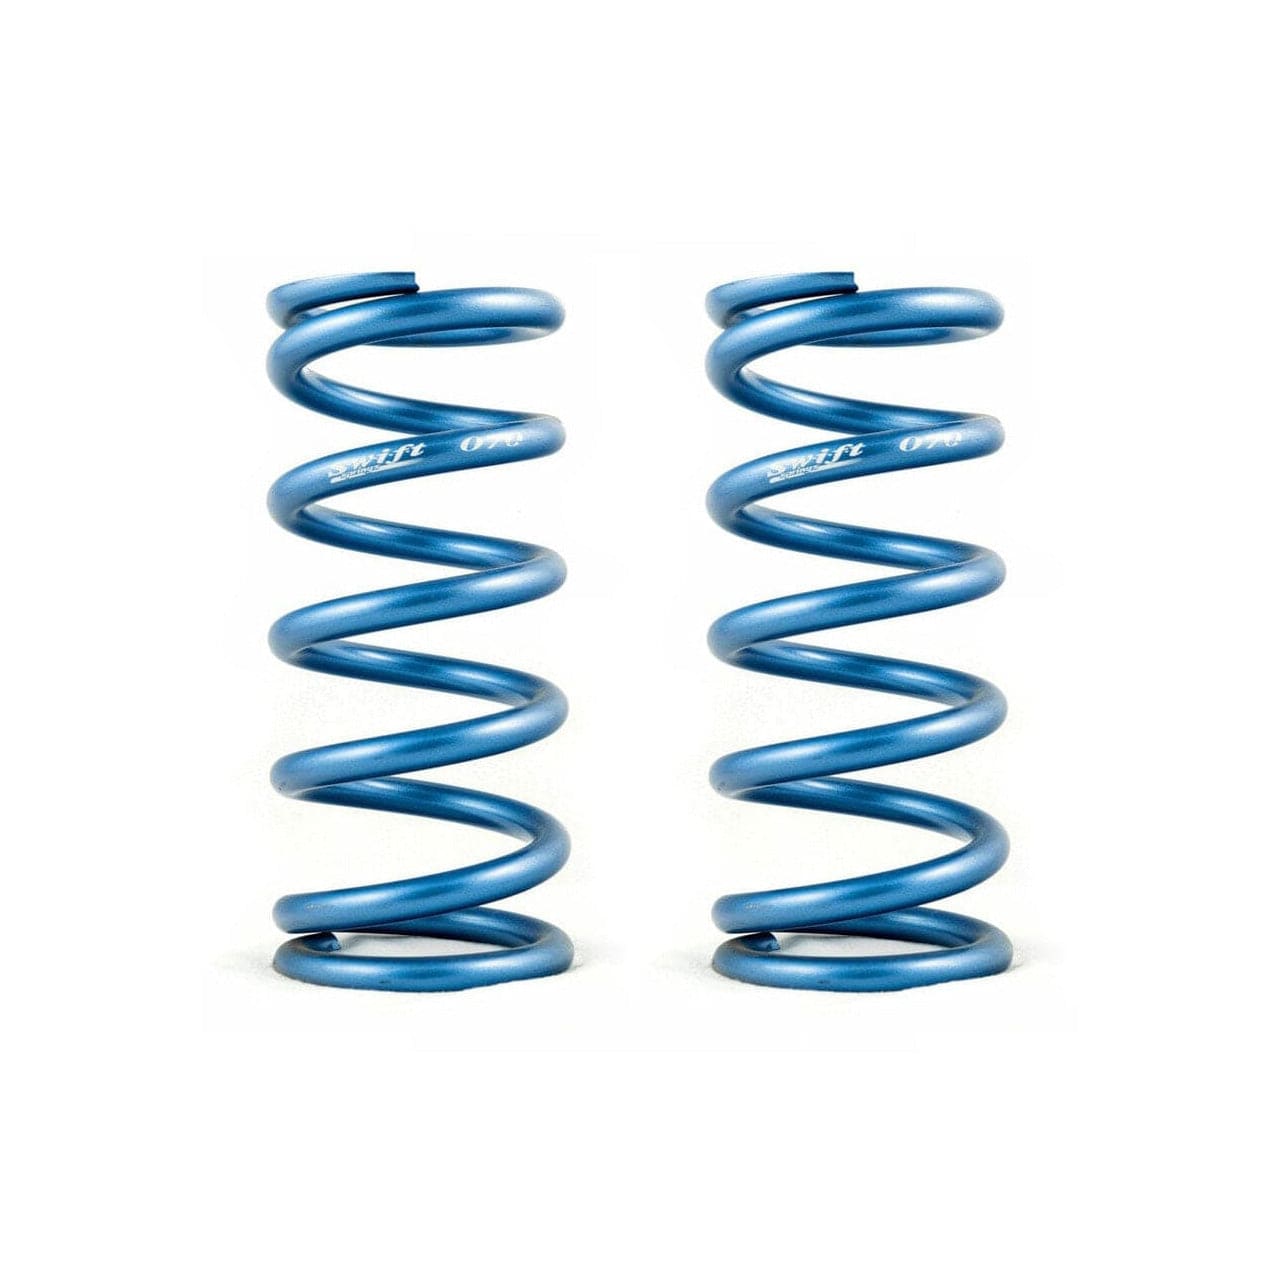 Swift Springs Metric Coilover Springs - ID 60mm, 9" Length